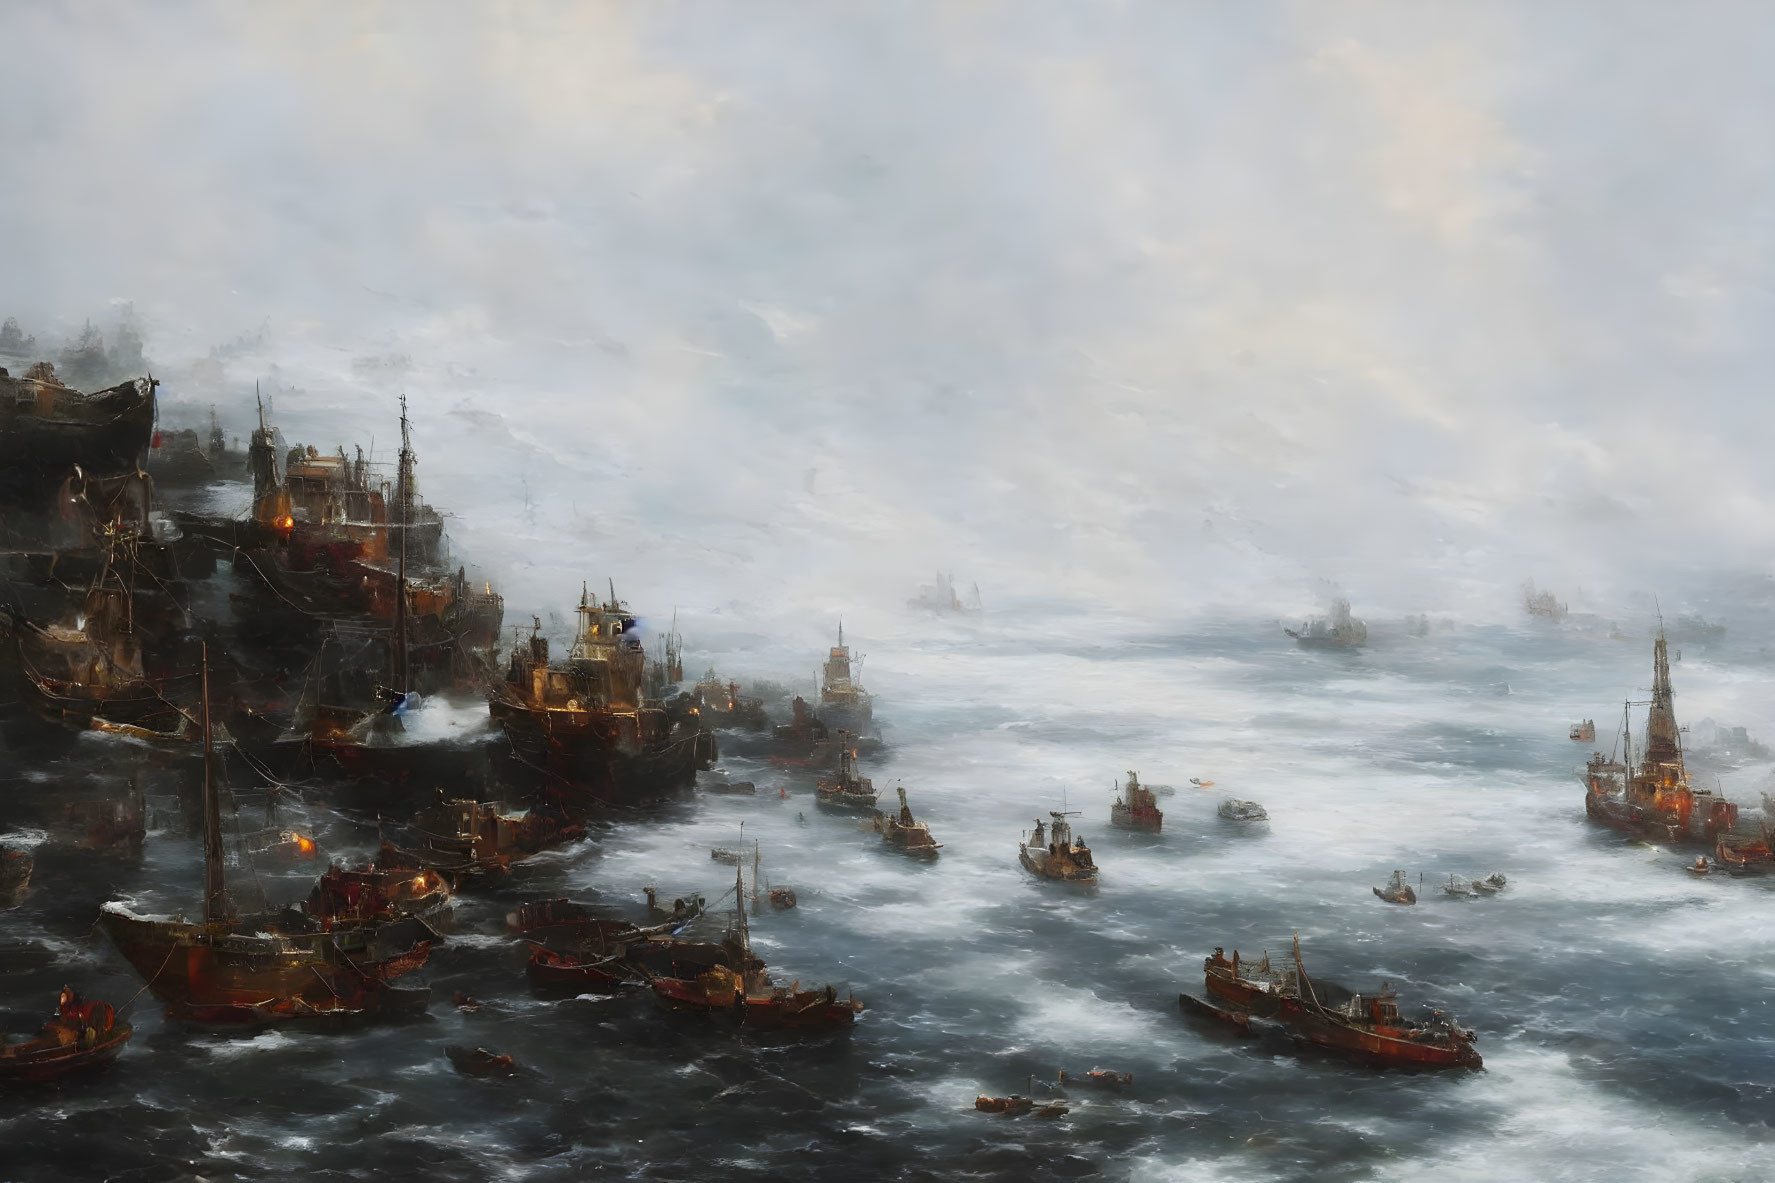 Vintage Ships and Boats in Misty Sea Scene